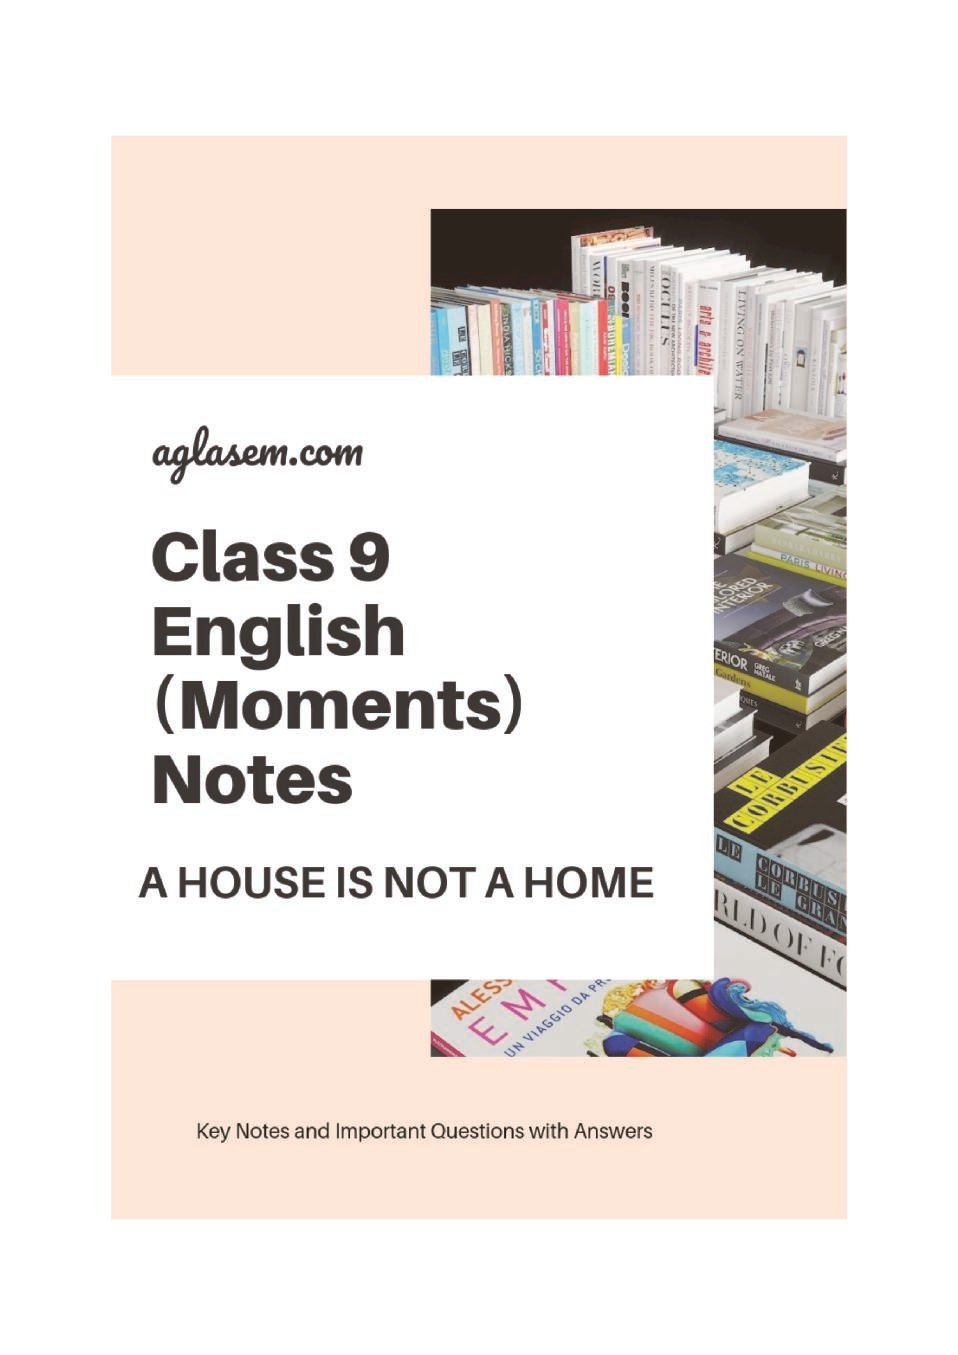 Class 9 English Moments Notes For A House is not a Home - Page 1